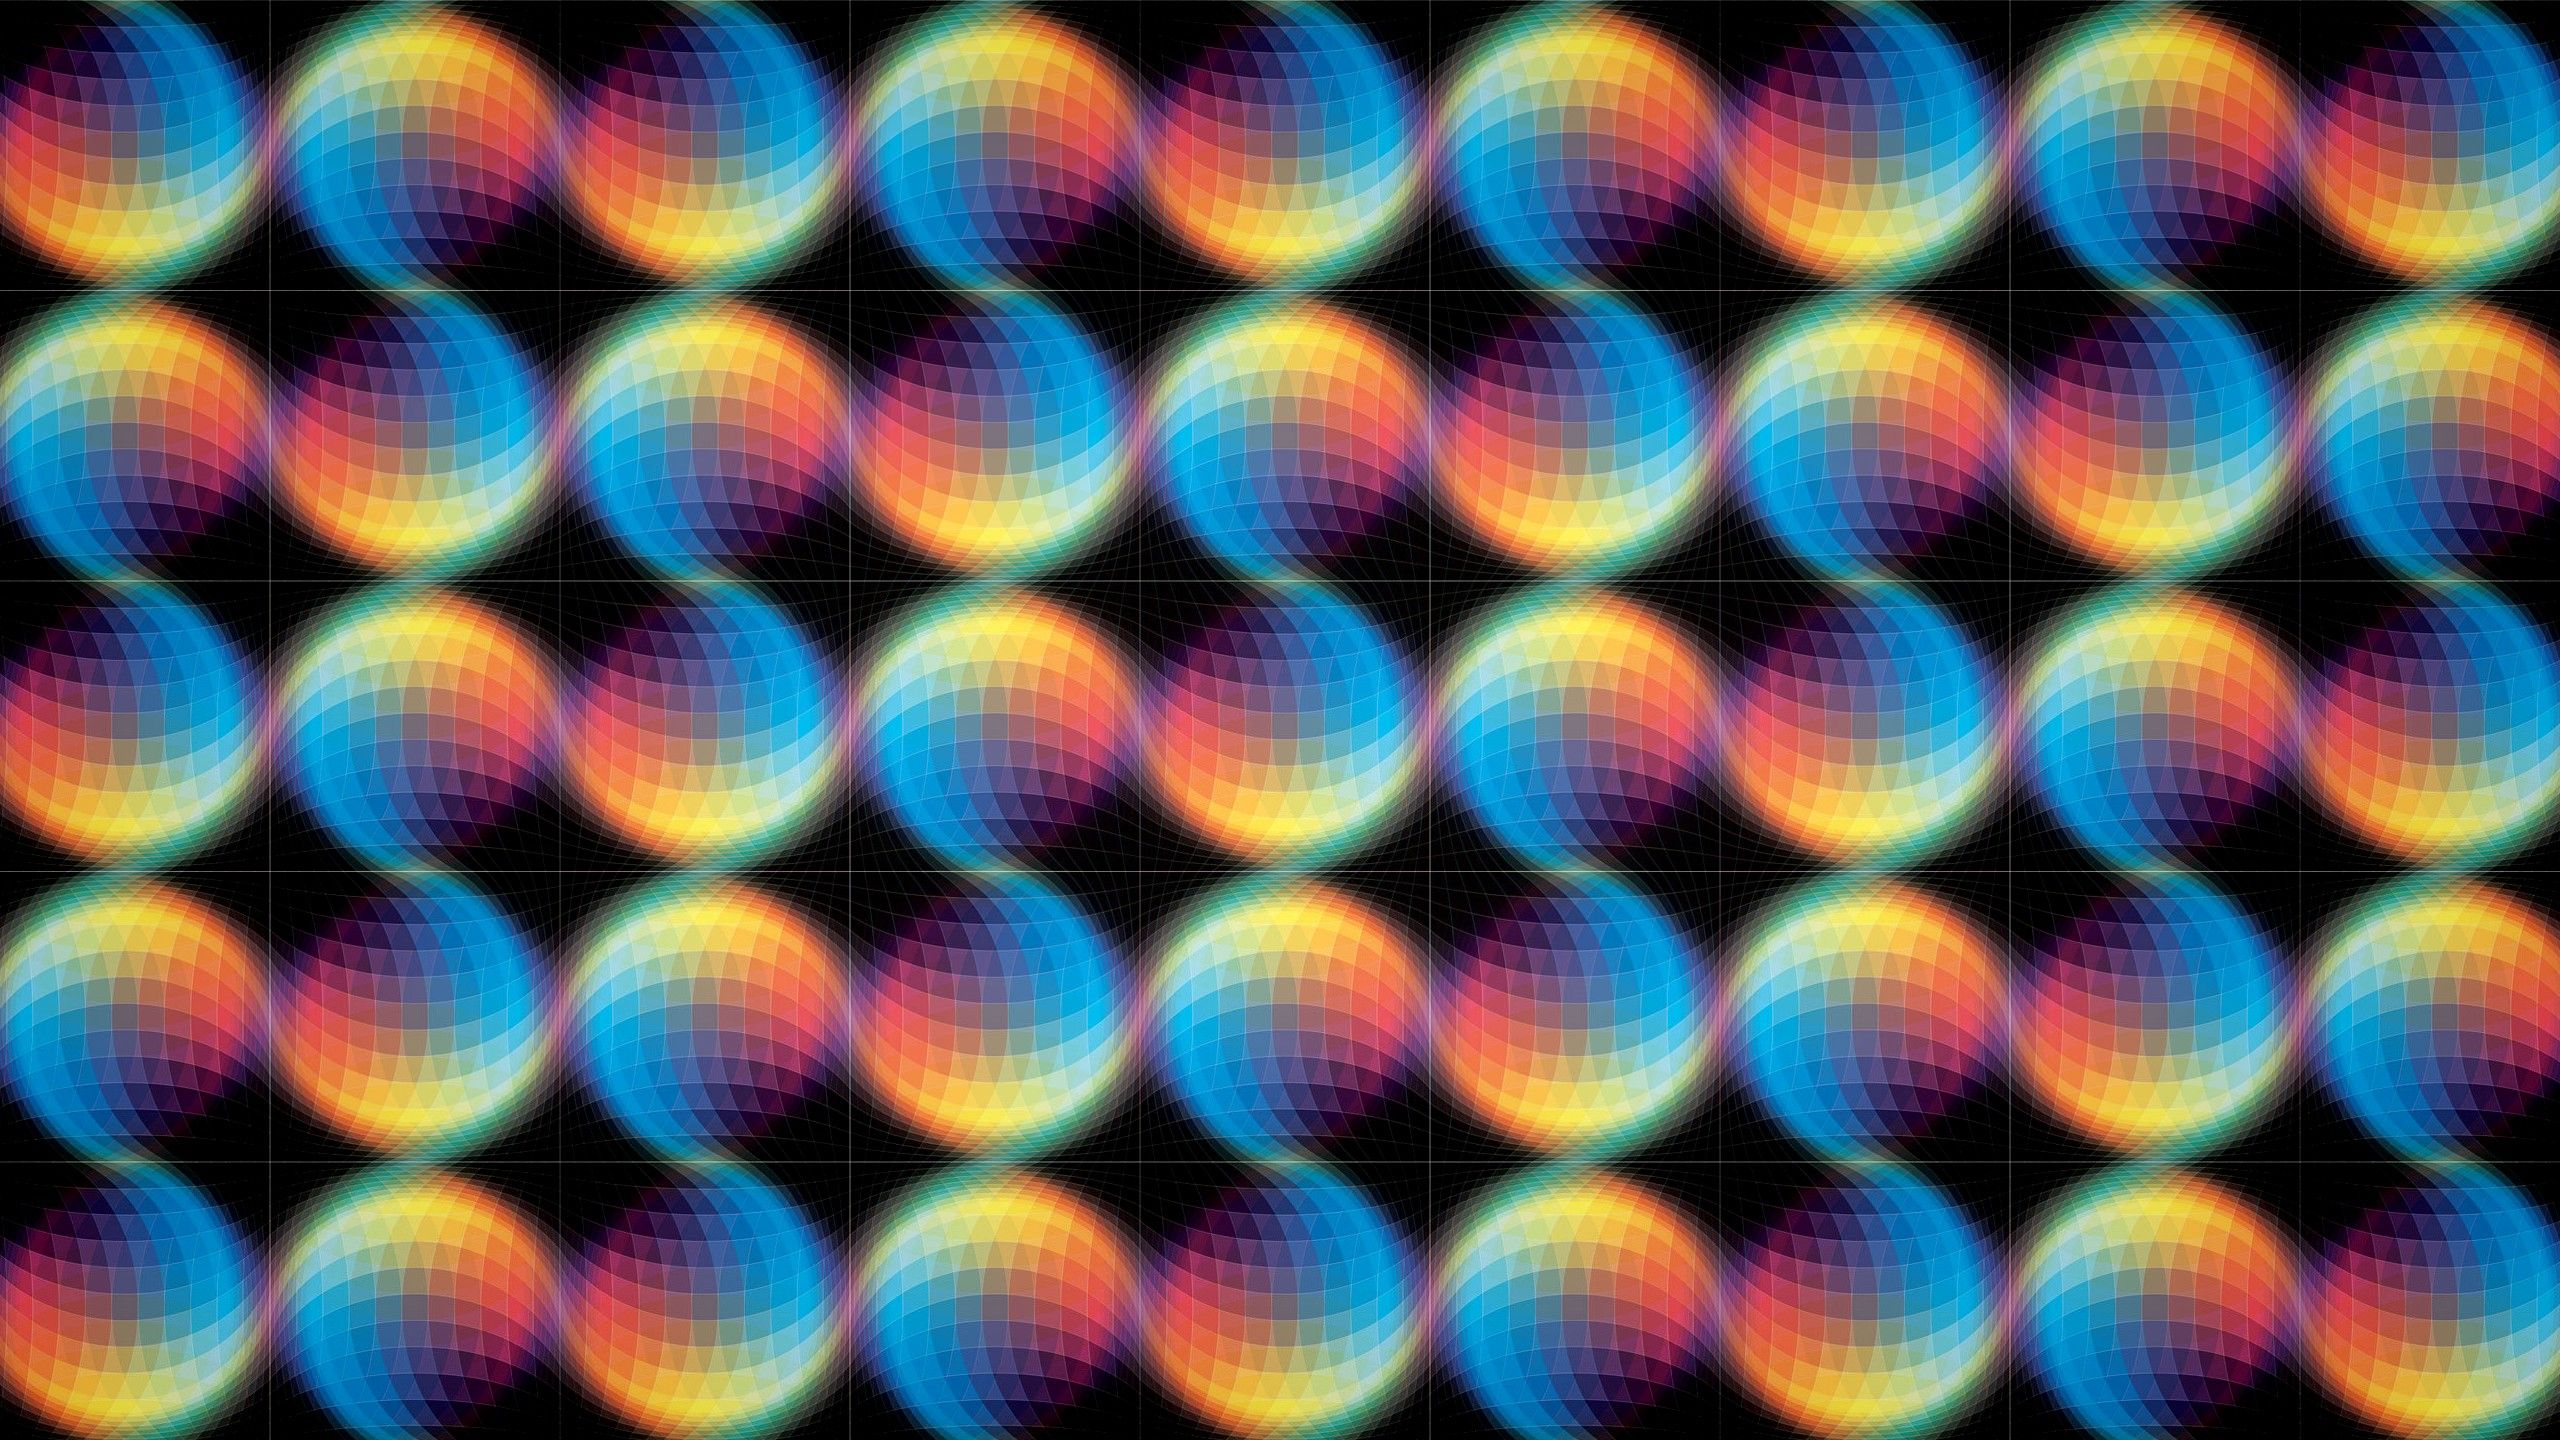 Psychedelic, Pc Aesthetic, Pattern .thewallpaper.co